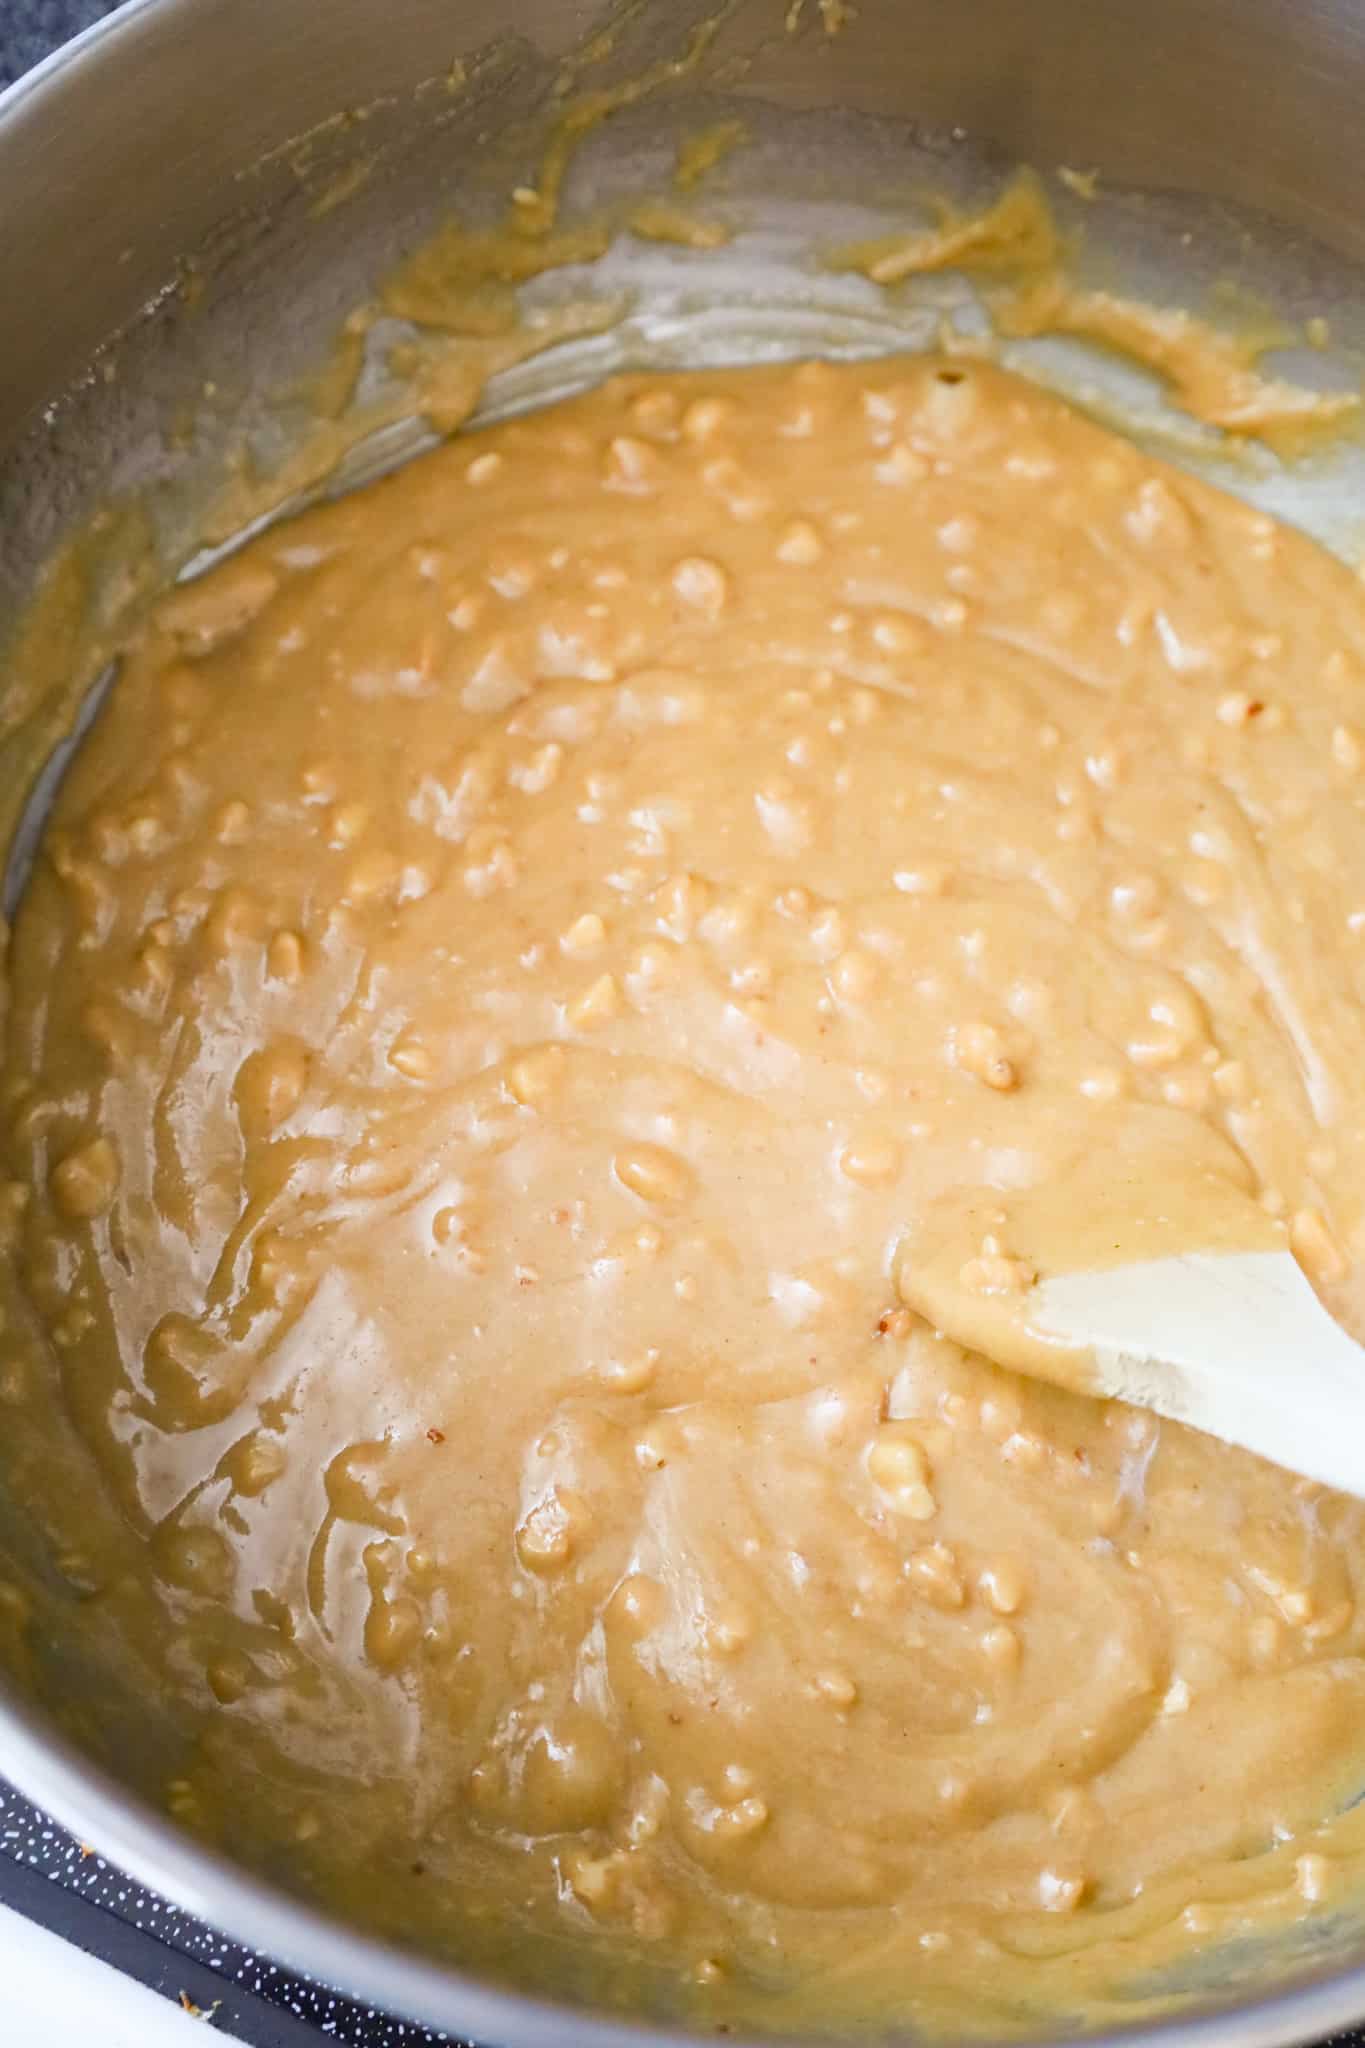 melted peanut butter, sugar and corn syrup mixture in a pot